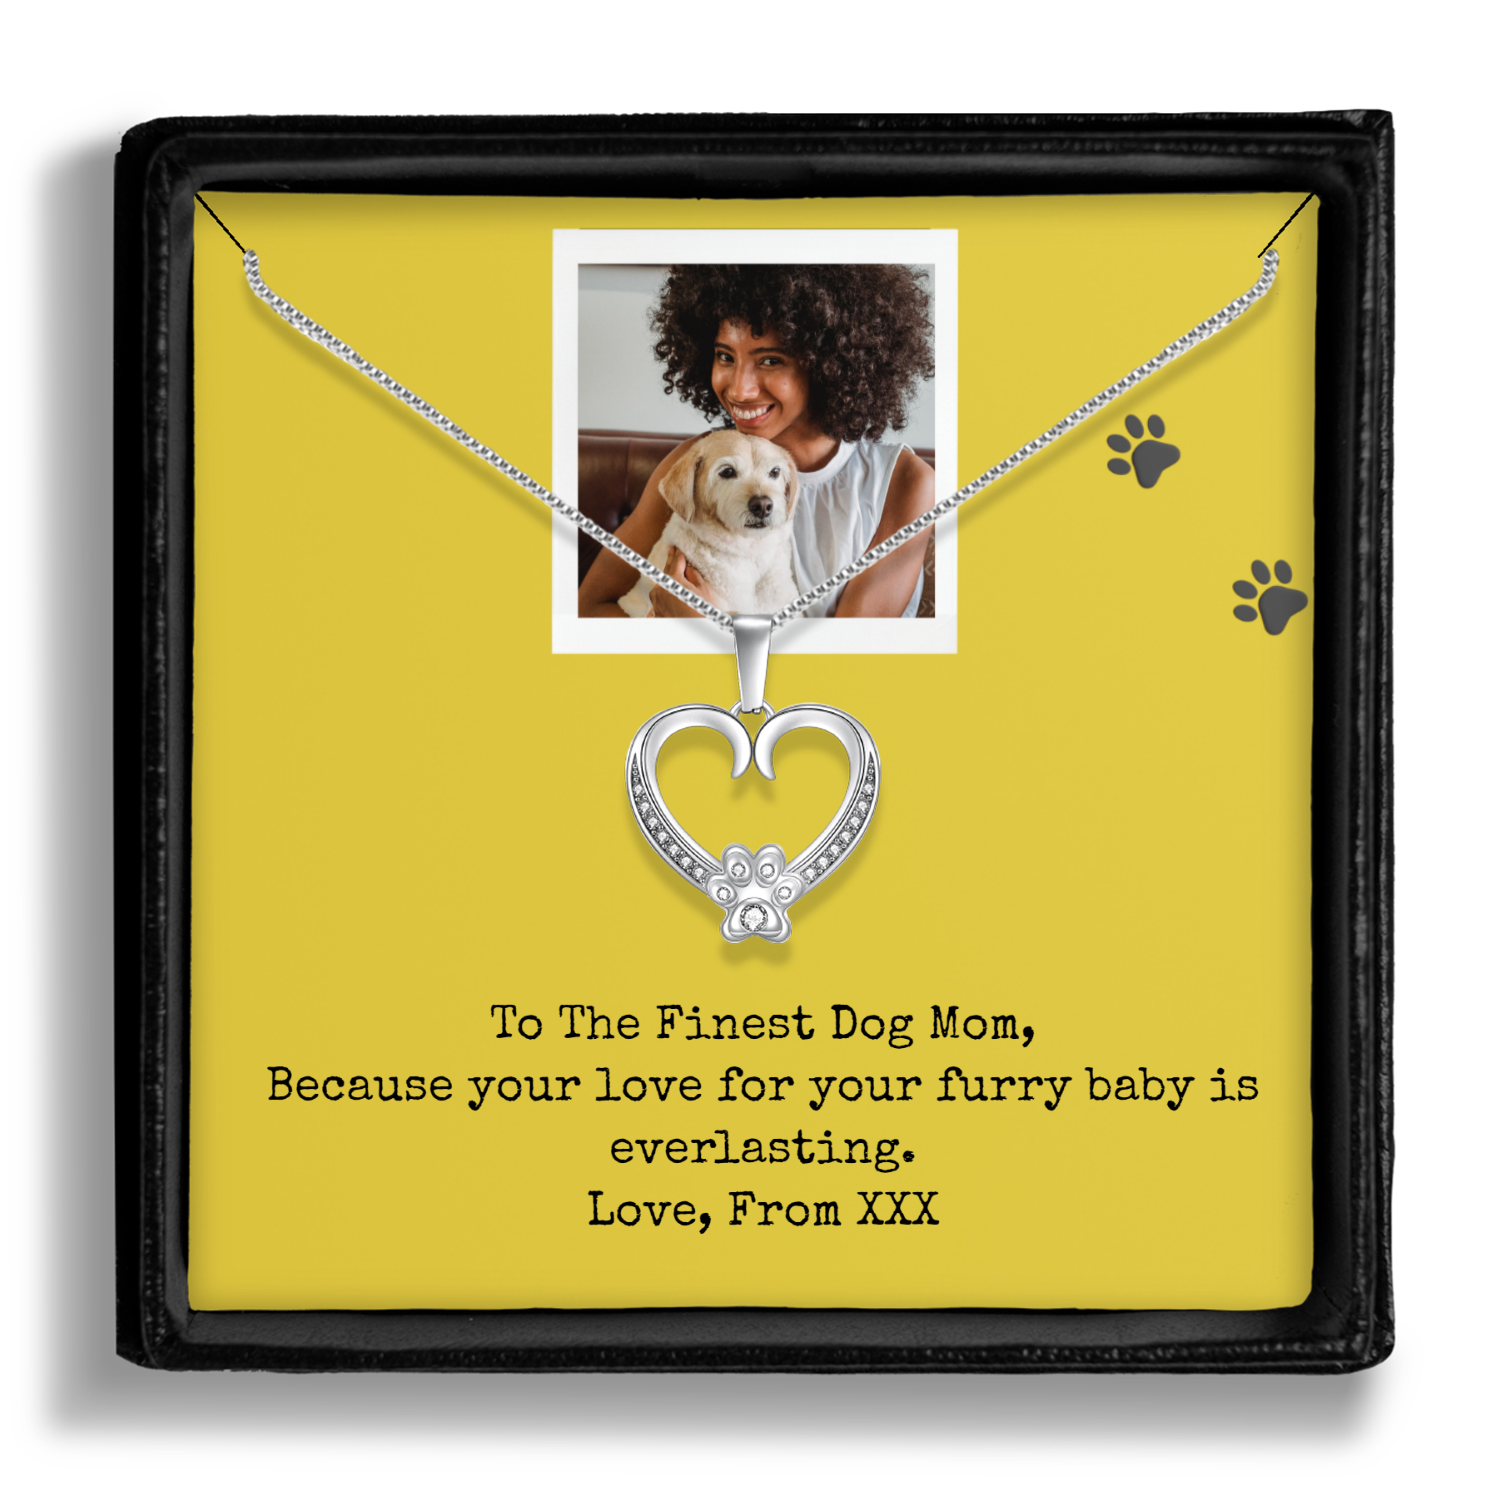 Personalized Necklaces + Message Cards - Paw Necklace + Personalized Card 